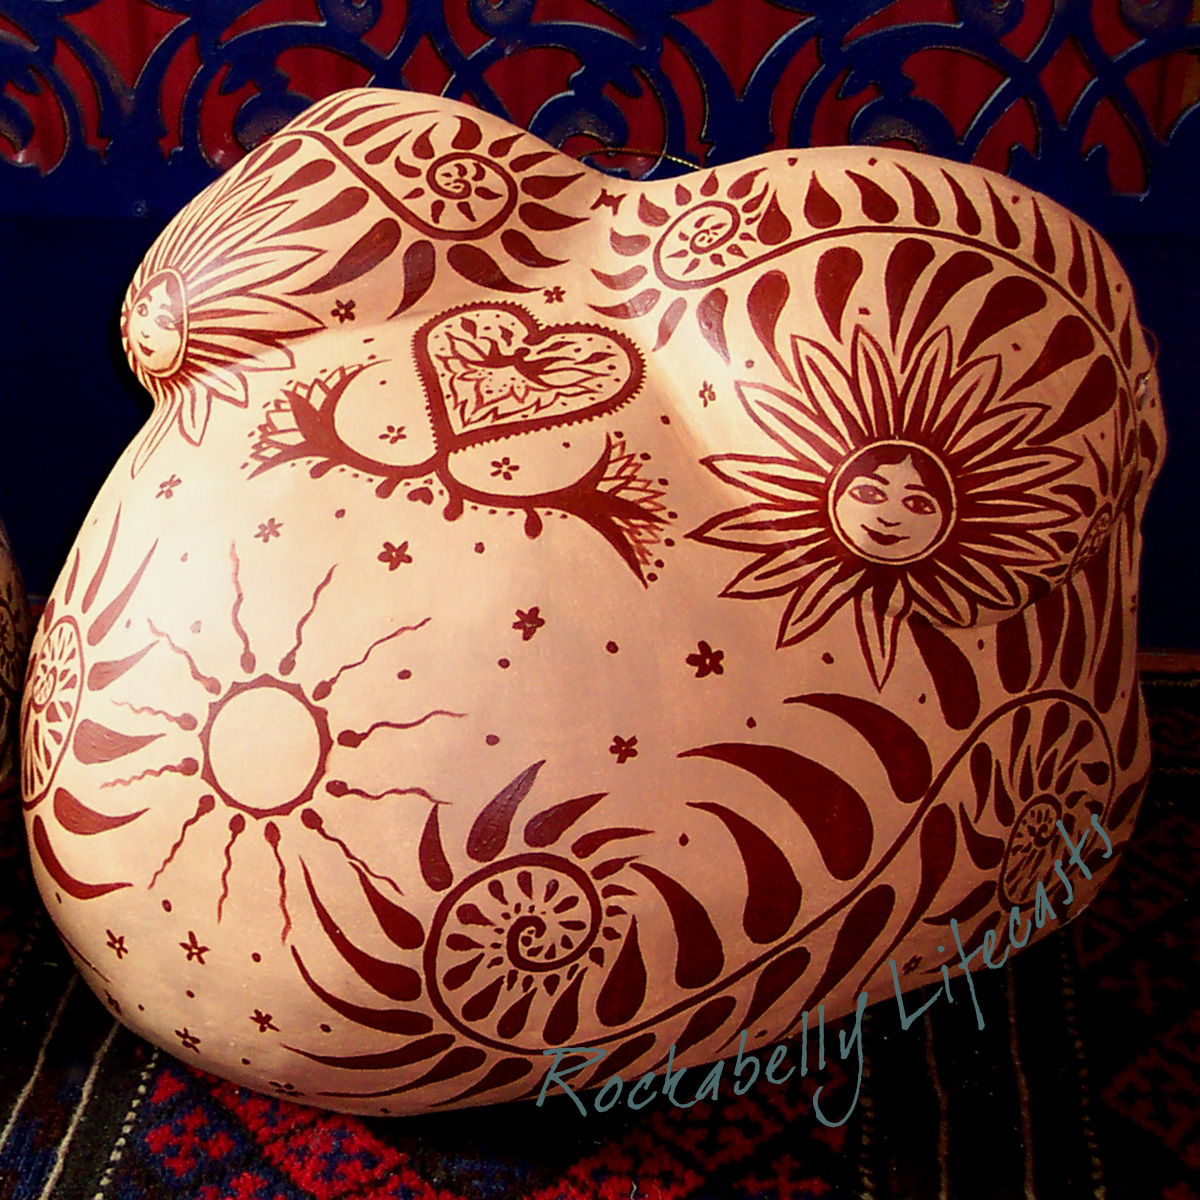 Rockabelly - pregnant belly mask low definition henna 